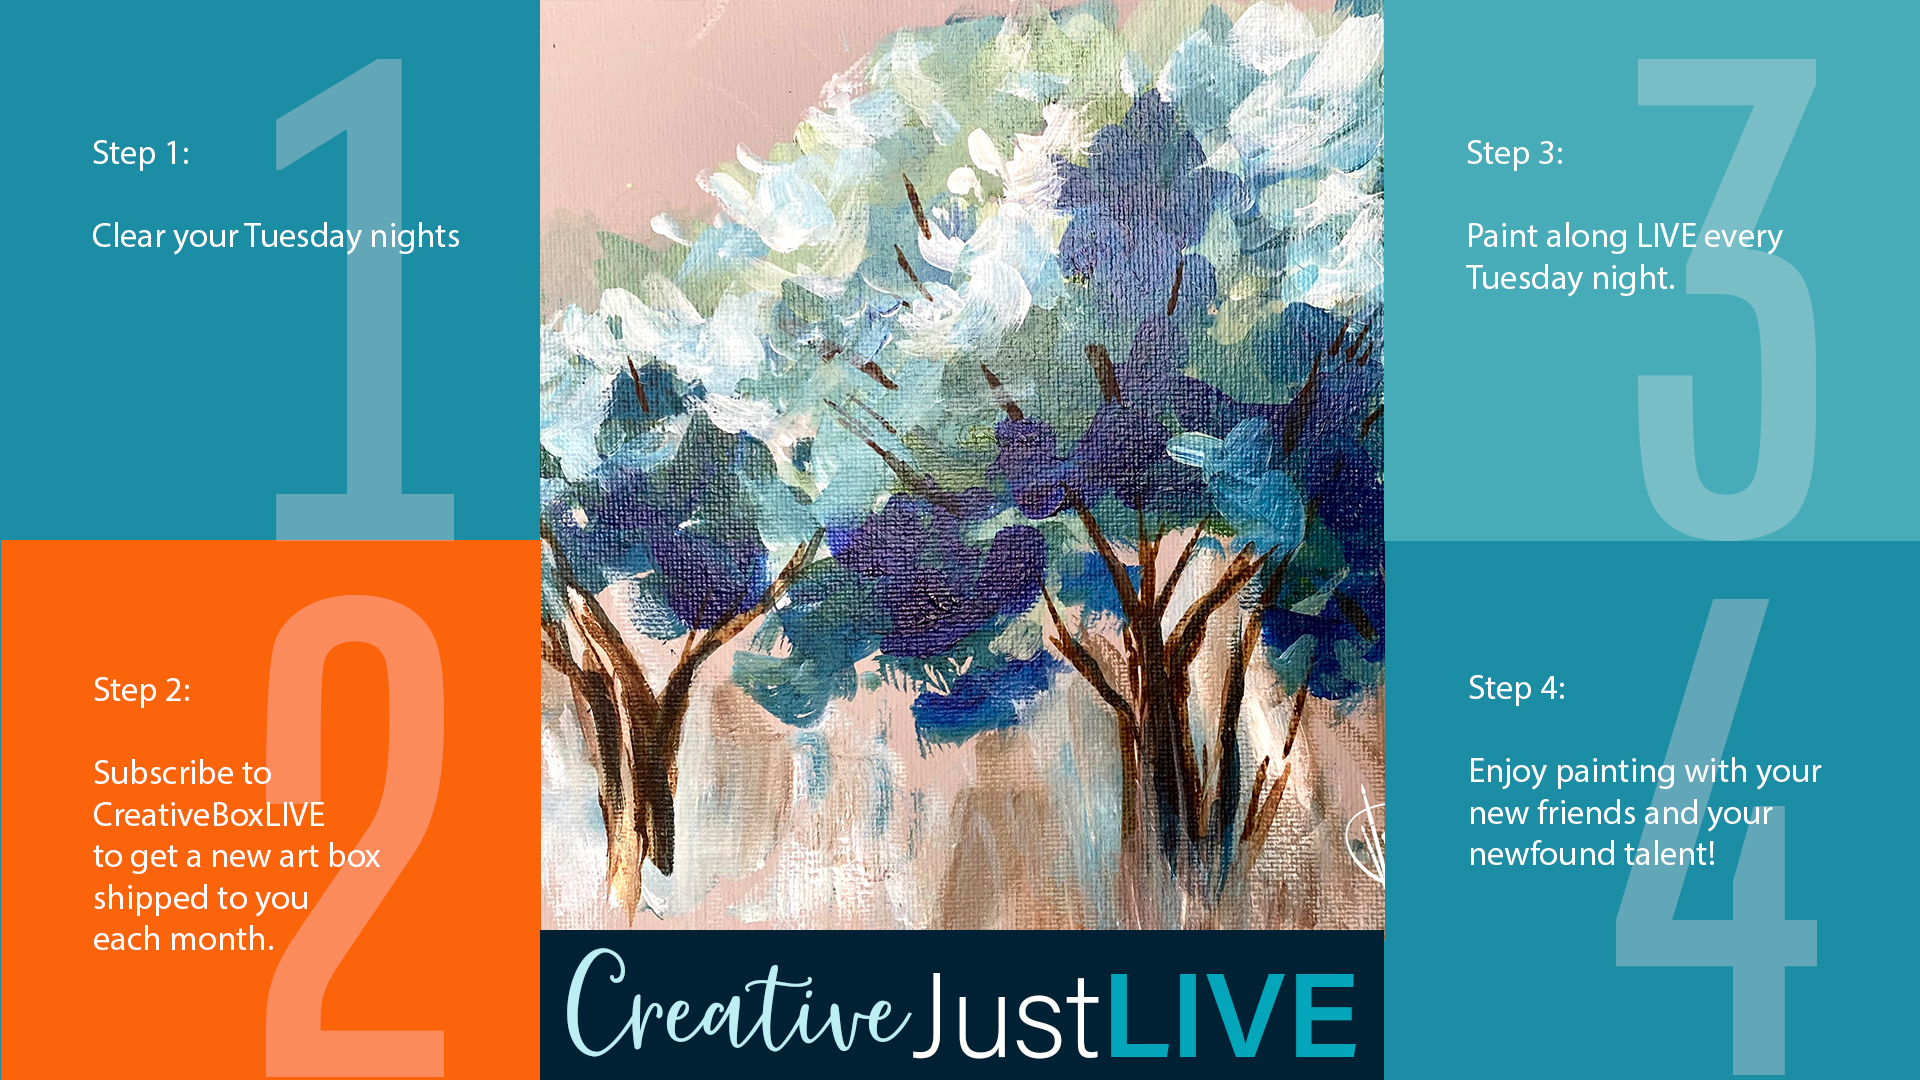 Swishy Trees FB from Creatively Uncorked http://creativelyuncorked.com/